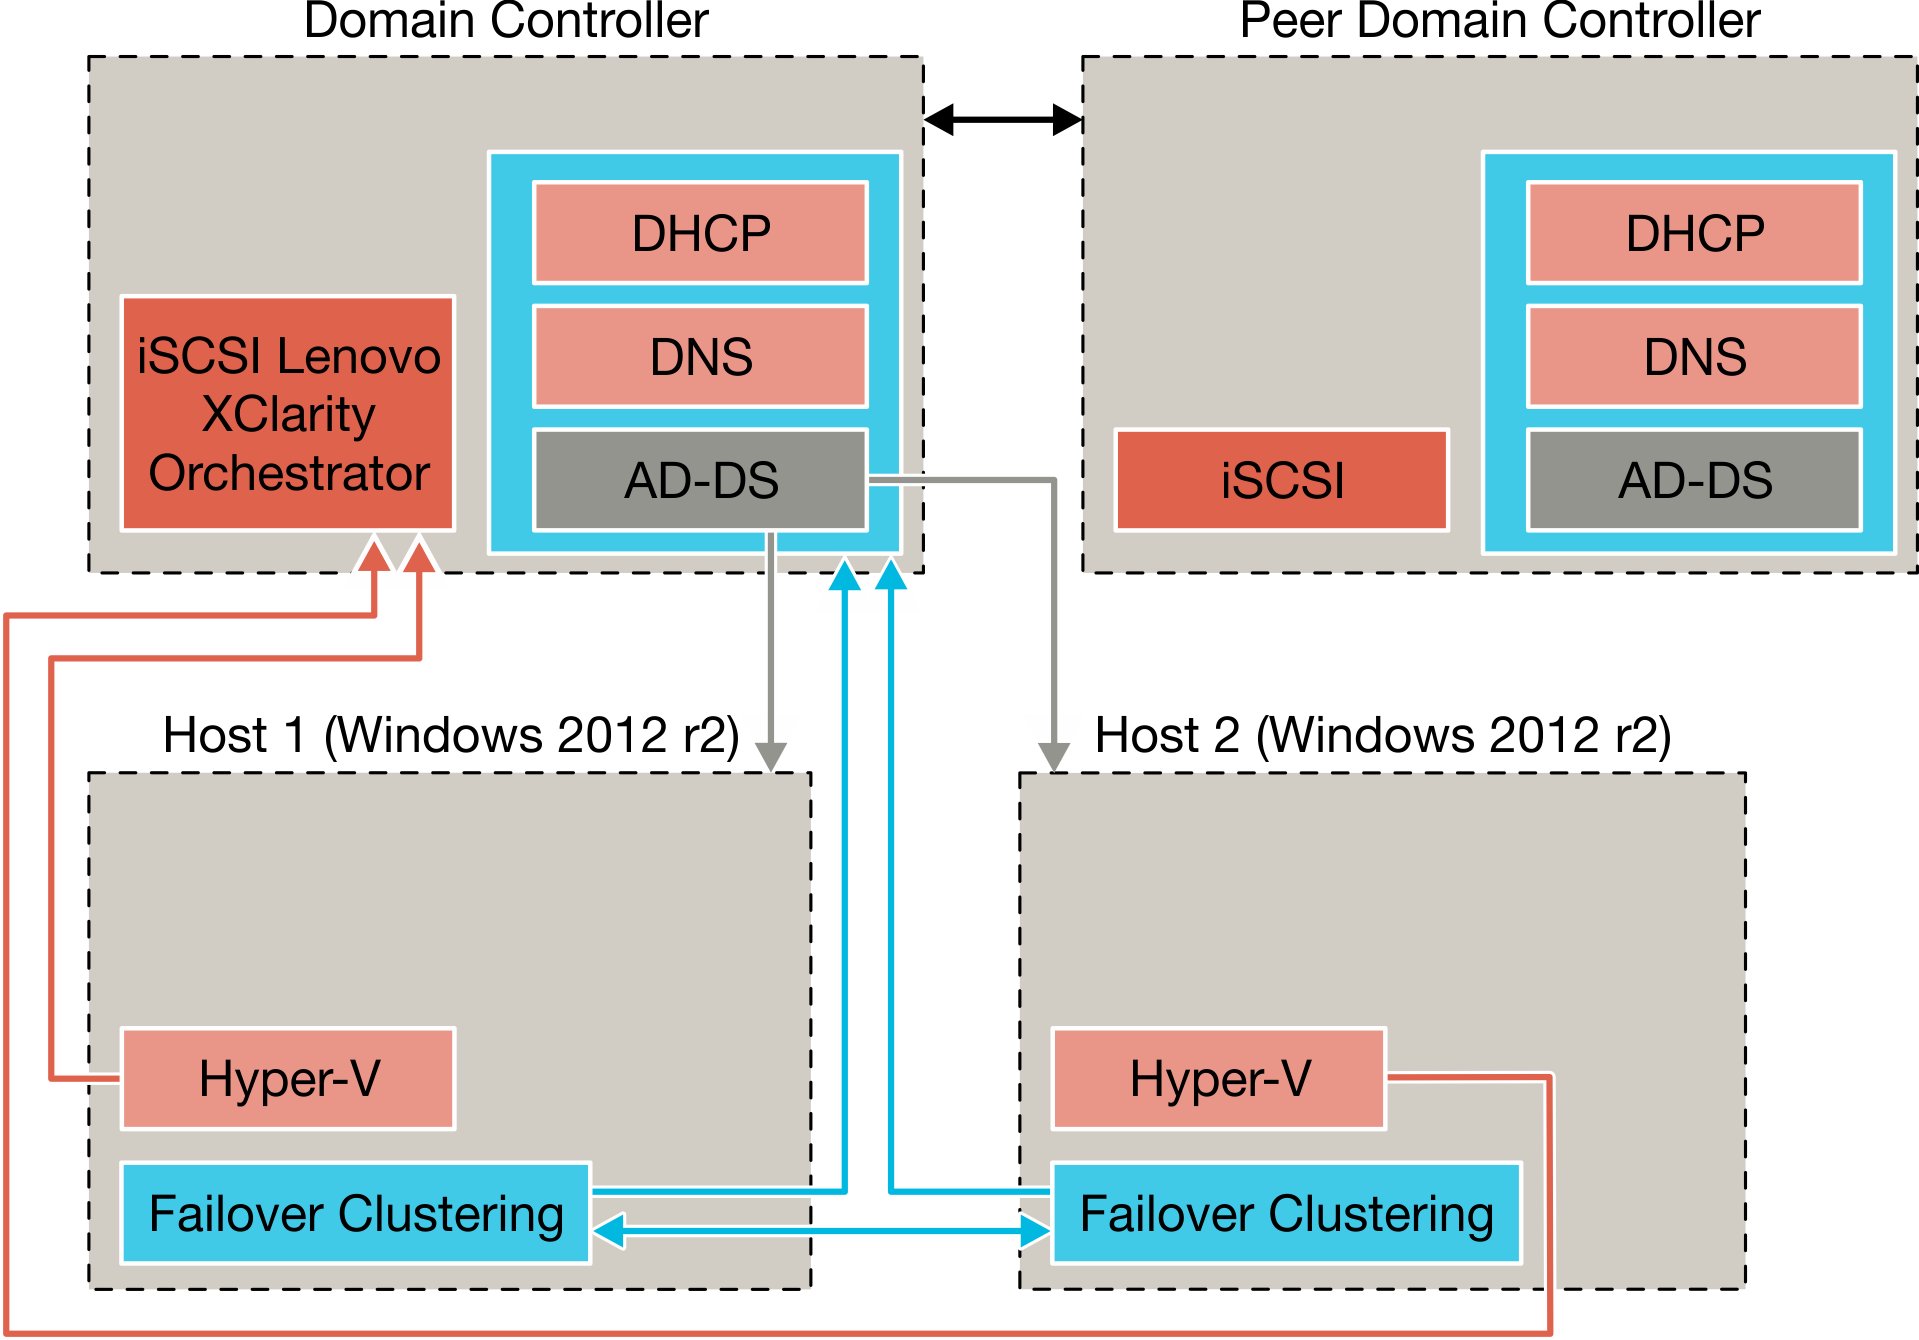 Illustrates a high availability setup in a Hyper-V environment